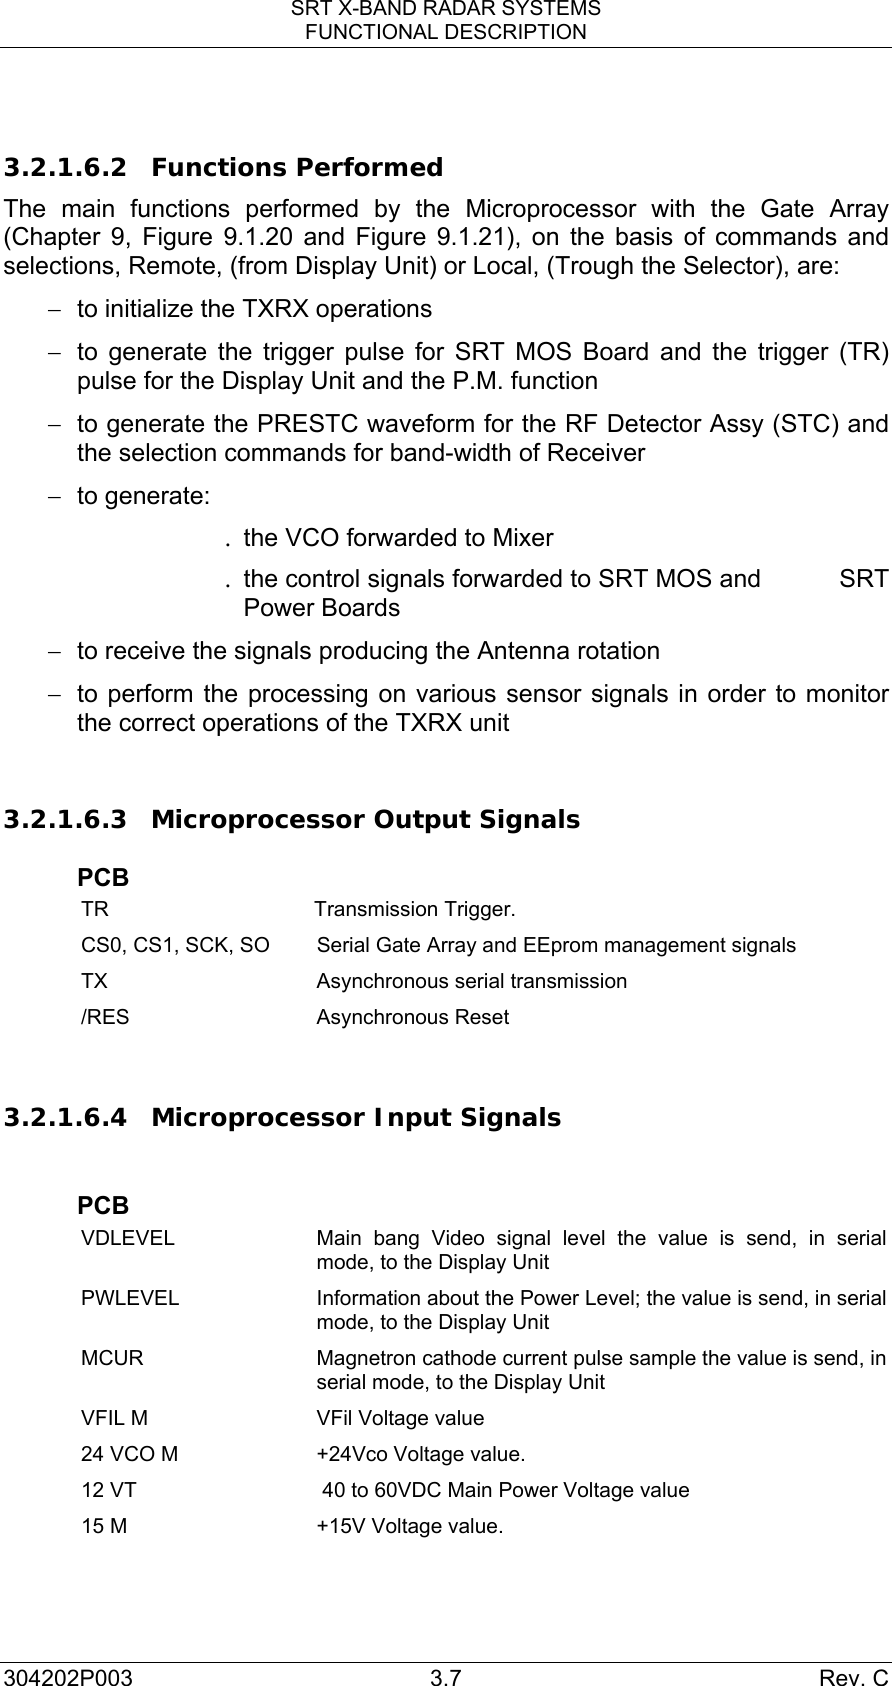 SRT X-BAND RADAR SYSTEMS FUNCTIONAL DESCRIPTION 304202P003 3.7  Rev. C  3.2.1.6.2 Functions Performed The main functions performed by the Microprocessor with the Gate Array (Chapter 9, Figure 9.1.20 and Figure 9.1.21), on the basis of commands and selections, Remote, (from Display Unit) or Local, (Trough the Selector), are: −  to initialize the TXRX operations −  to generate the trigger pulse for SRT MOS Board and the trigger (TR) pulse for the Display Unit and the P.M. function −  to generate the PRESTC waveform for the RF Detector Assy (STC) and the selection commands for band-width of Receiver − to generate: .  the VCO forwarded to Mixer .  the control signals forwarded to SRT MOS and           SRT Power Boards −  to receive the signals producing the Antenna rotation −  to perform the processing on various sensor signals in order to monitor the correct operations of the TXRX unit  3.2.1.6.3 Microprocessor Output Signals  PCB TR Transmission Trigger. CS0, CS1, SCK, SO  Serial Gate Array and EEprom management signals TX  Asynchronous serial transmission /RES Asynchronous Reset  3.2.1.6.4 Microprocessor Input Signals   PCB VDLEVEL  Main bang Video signal level the value is send, in serial mode, to the Display Unit PWLEVEL  Information about the Power Level; the value is send, in serial mode, to the Display Unit MCUR  Magnetron cathode current pulse sample the value is send, in serial mode, to the Display Unit VFIL M  VFil Voltage value  24 VCO M  +24Vco Voltage value. 12 VT   40 to 60VDC Main Power Voltage value 15 M  +15V Voltage value. 